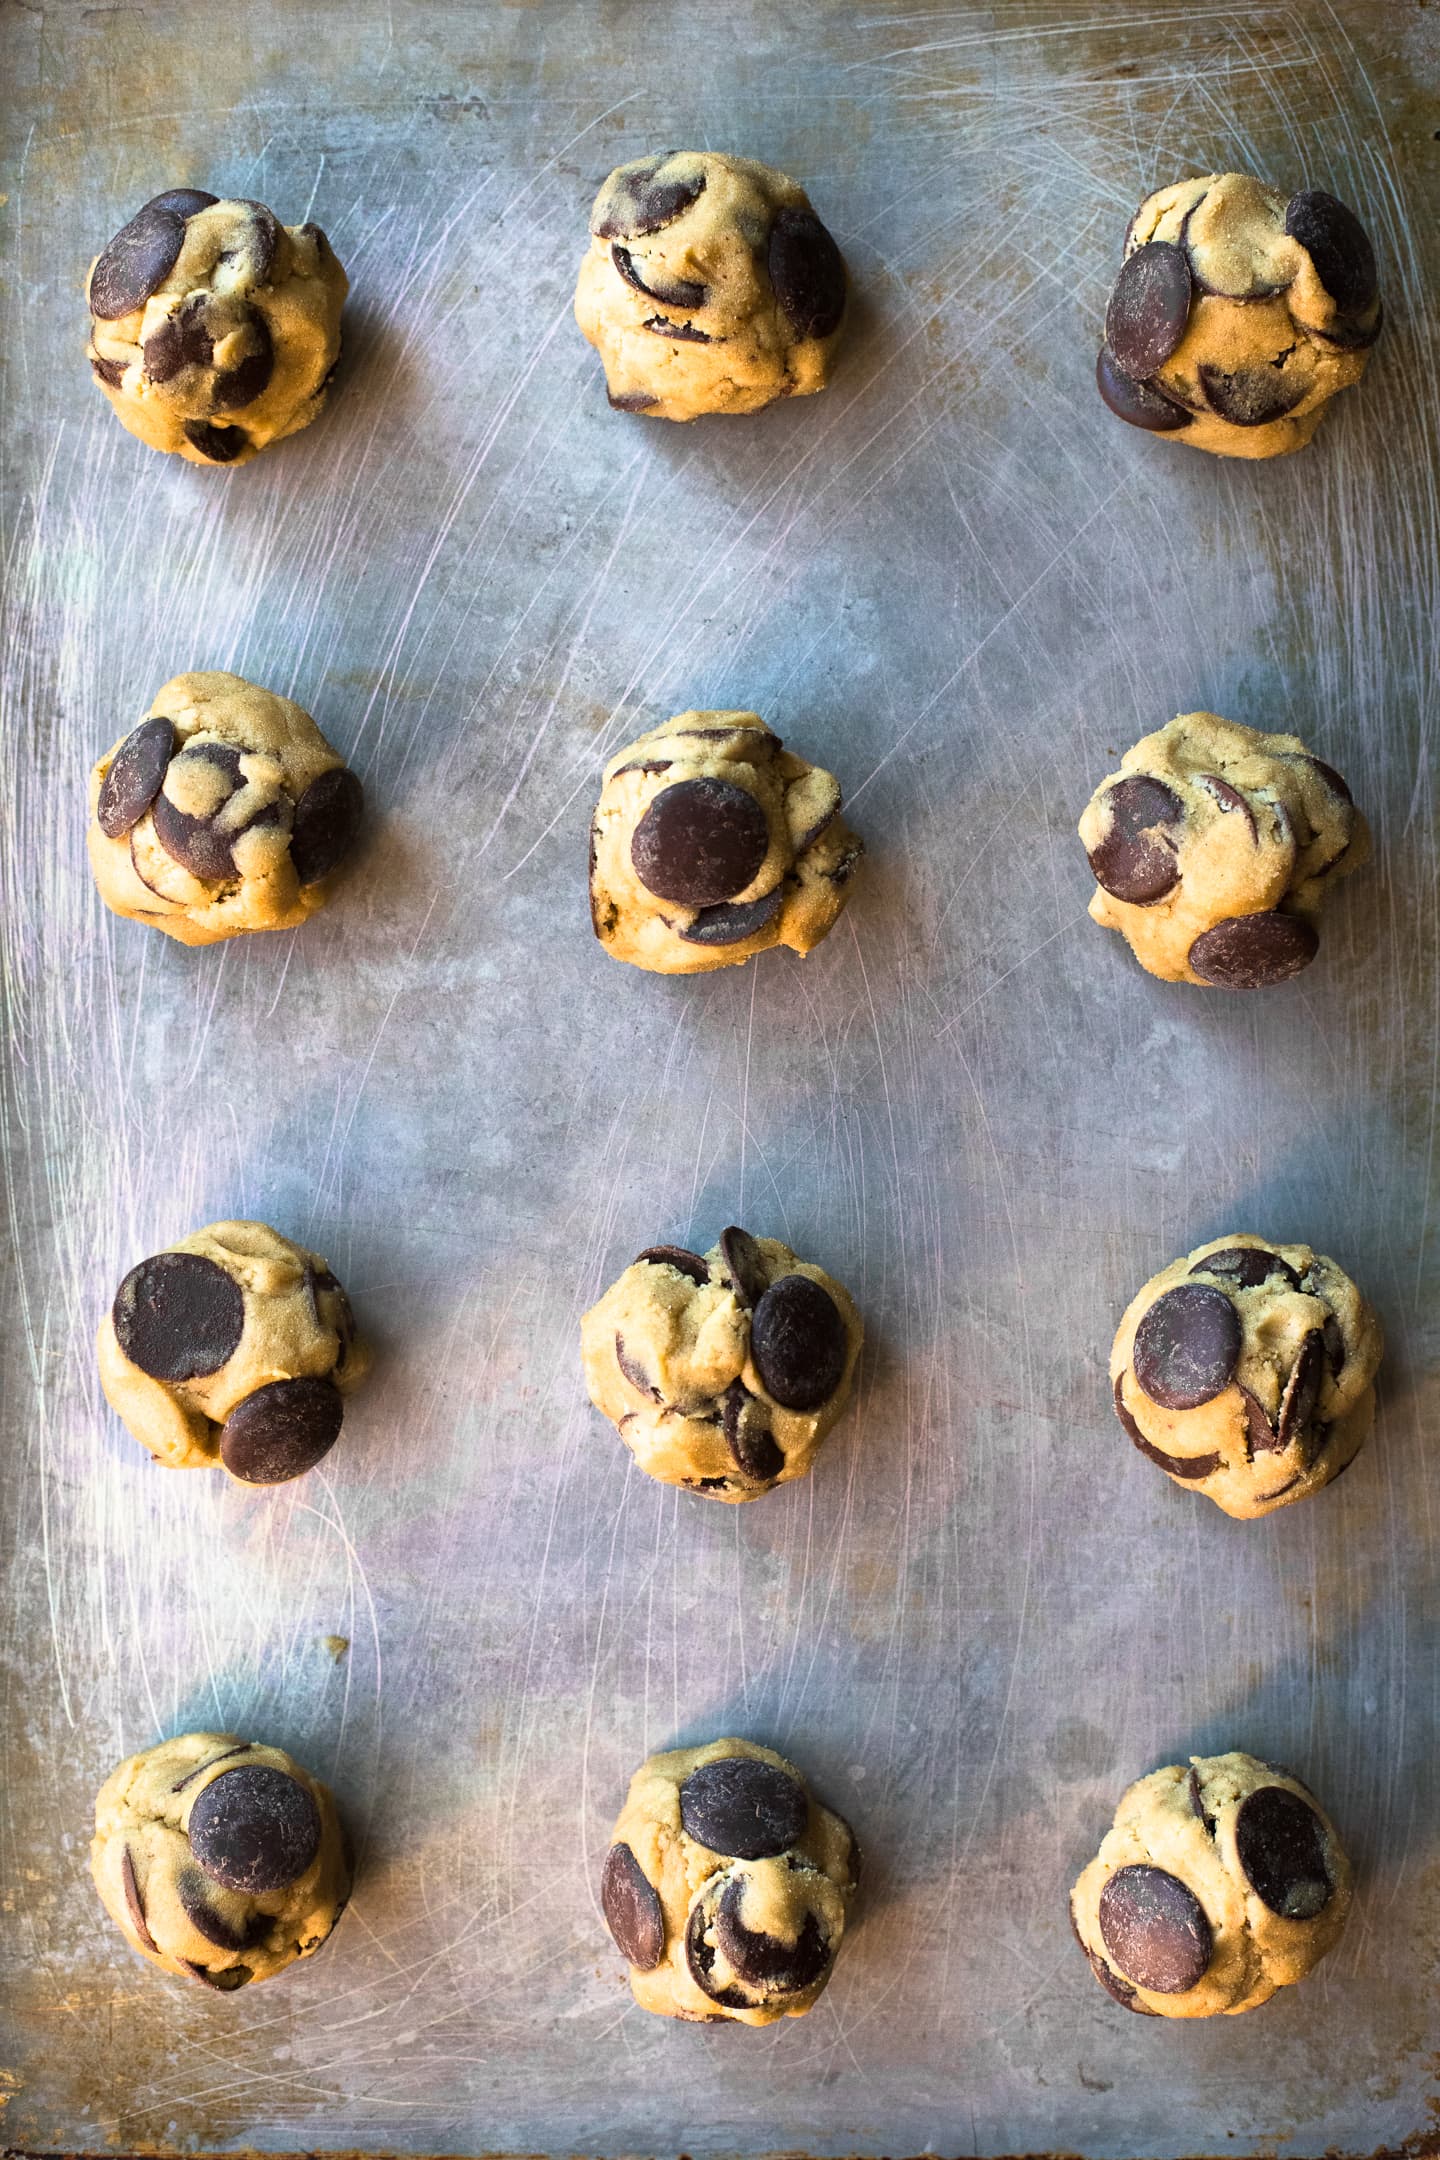 Overhead view of gluten-free chocolate chip cookie dough rolled into balls and arranged on a baking sheet.